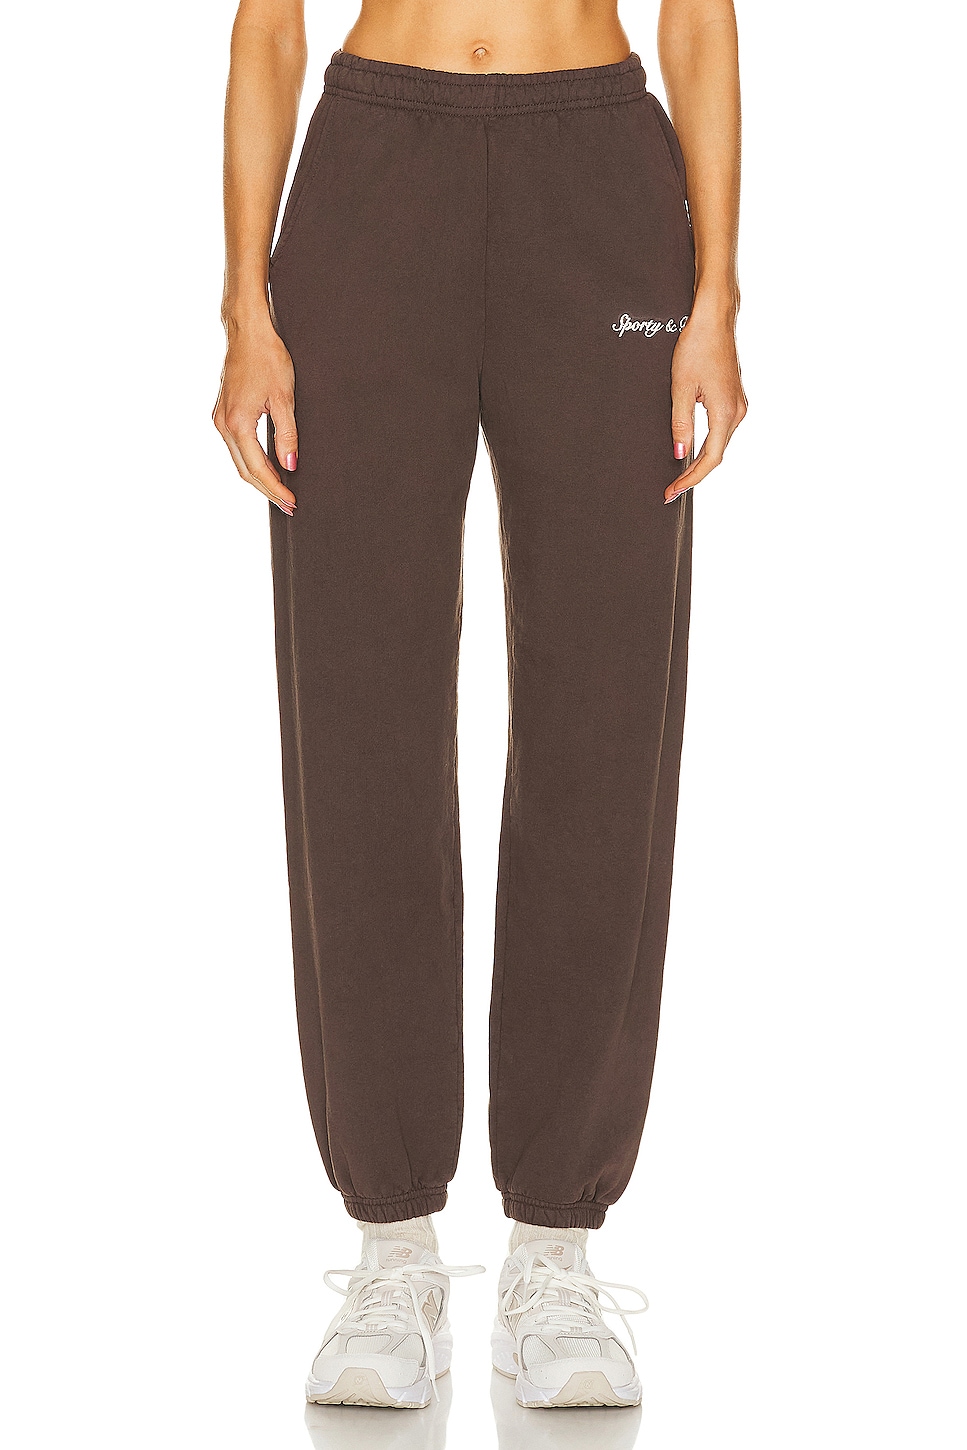 Image 1 of Sporty & Rich Syracuse Embroidered Sweatpant in Chocolate